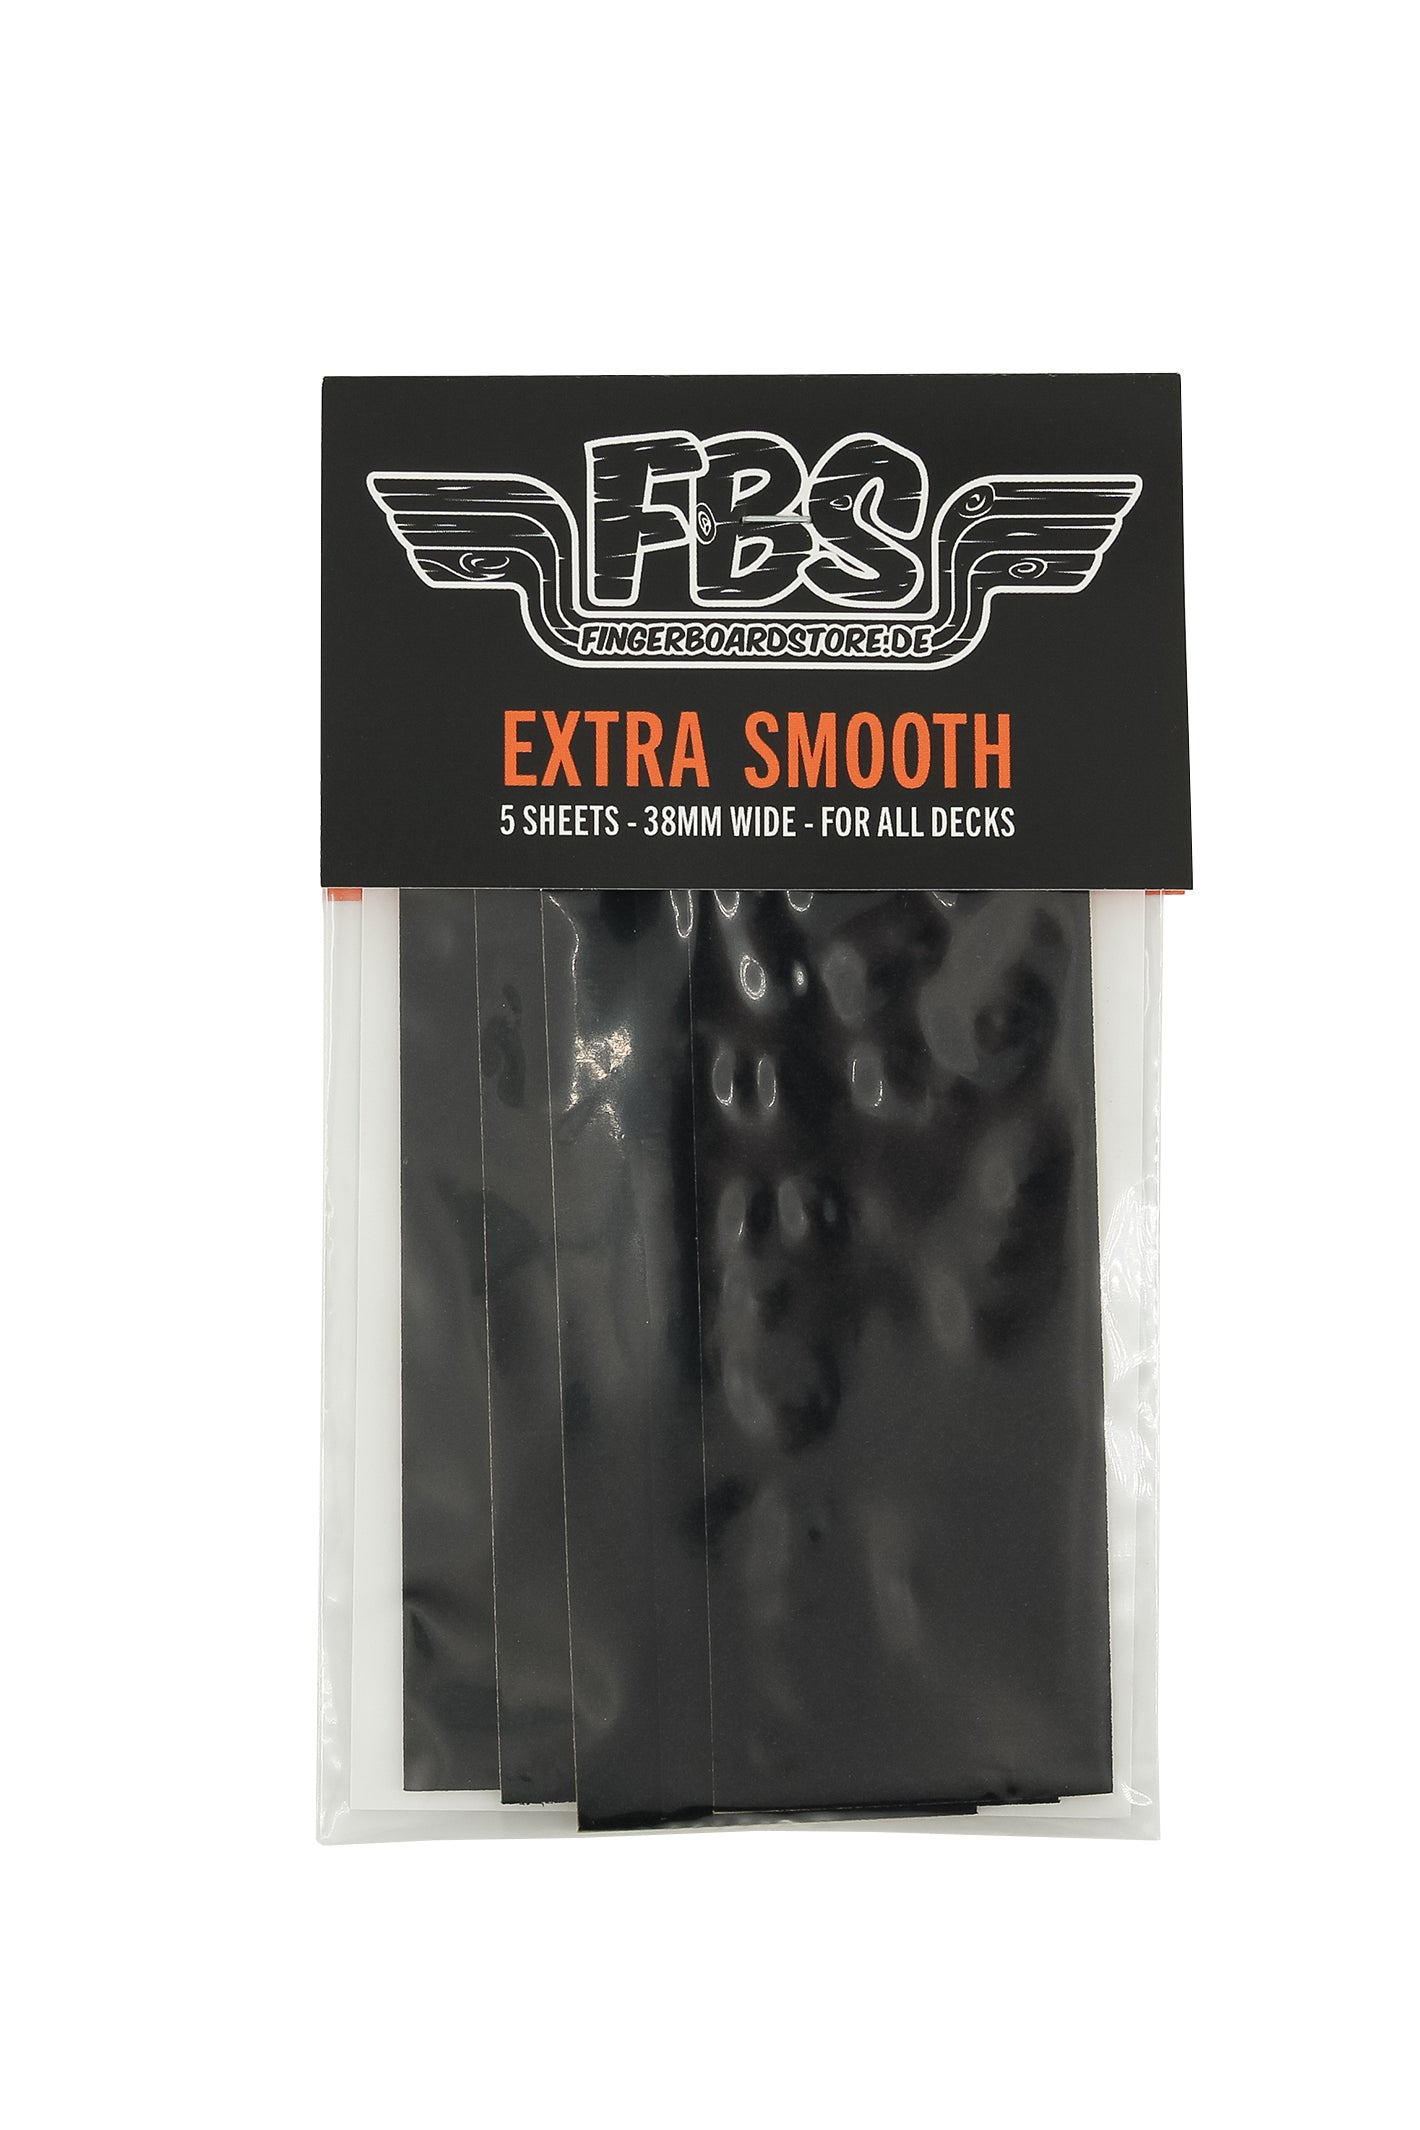 FBS Extra Smooth